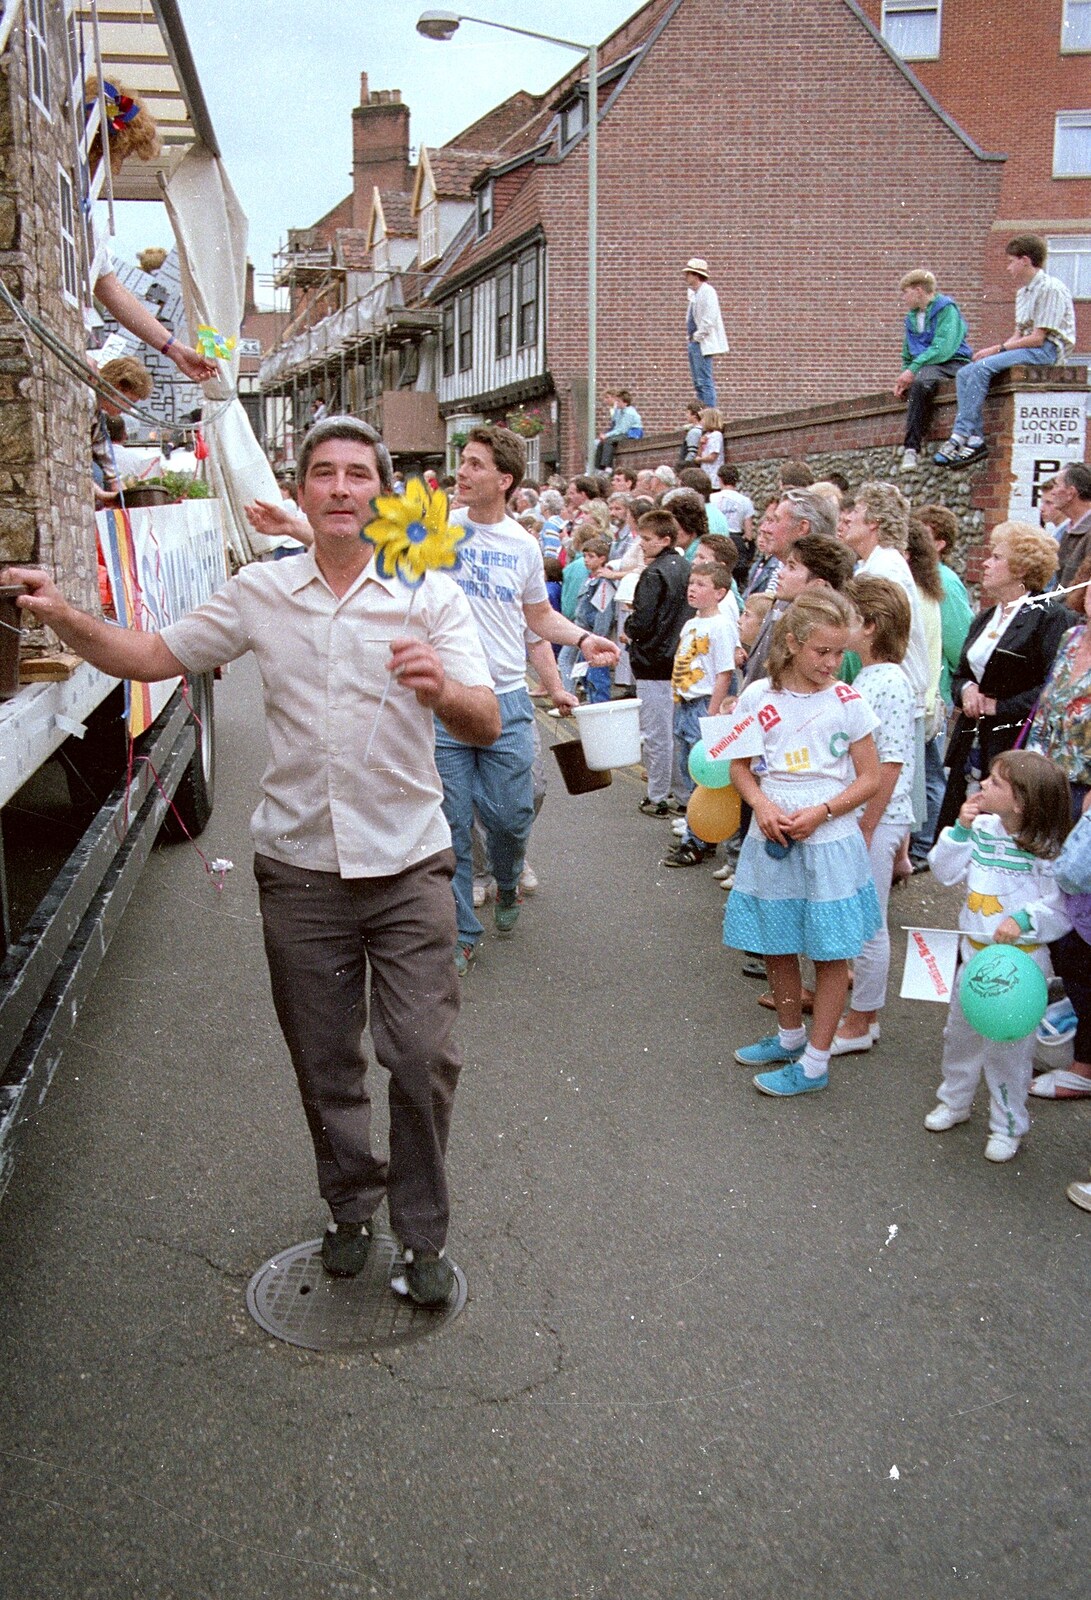 Waving a flower around on Palace Street from Soman-Wherry and the Lord Mayor's Parade, Norwich - 3rd May 1988